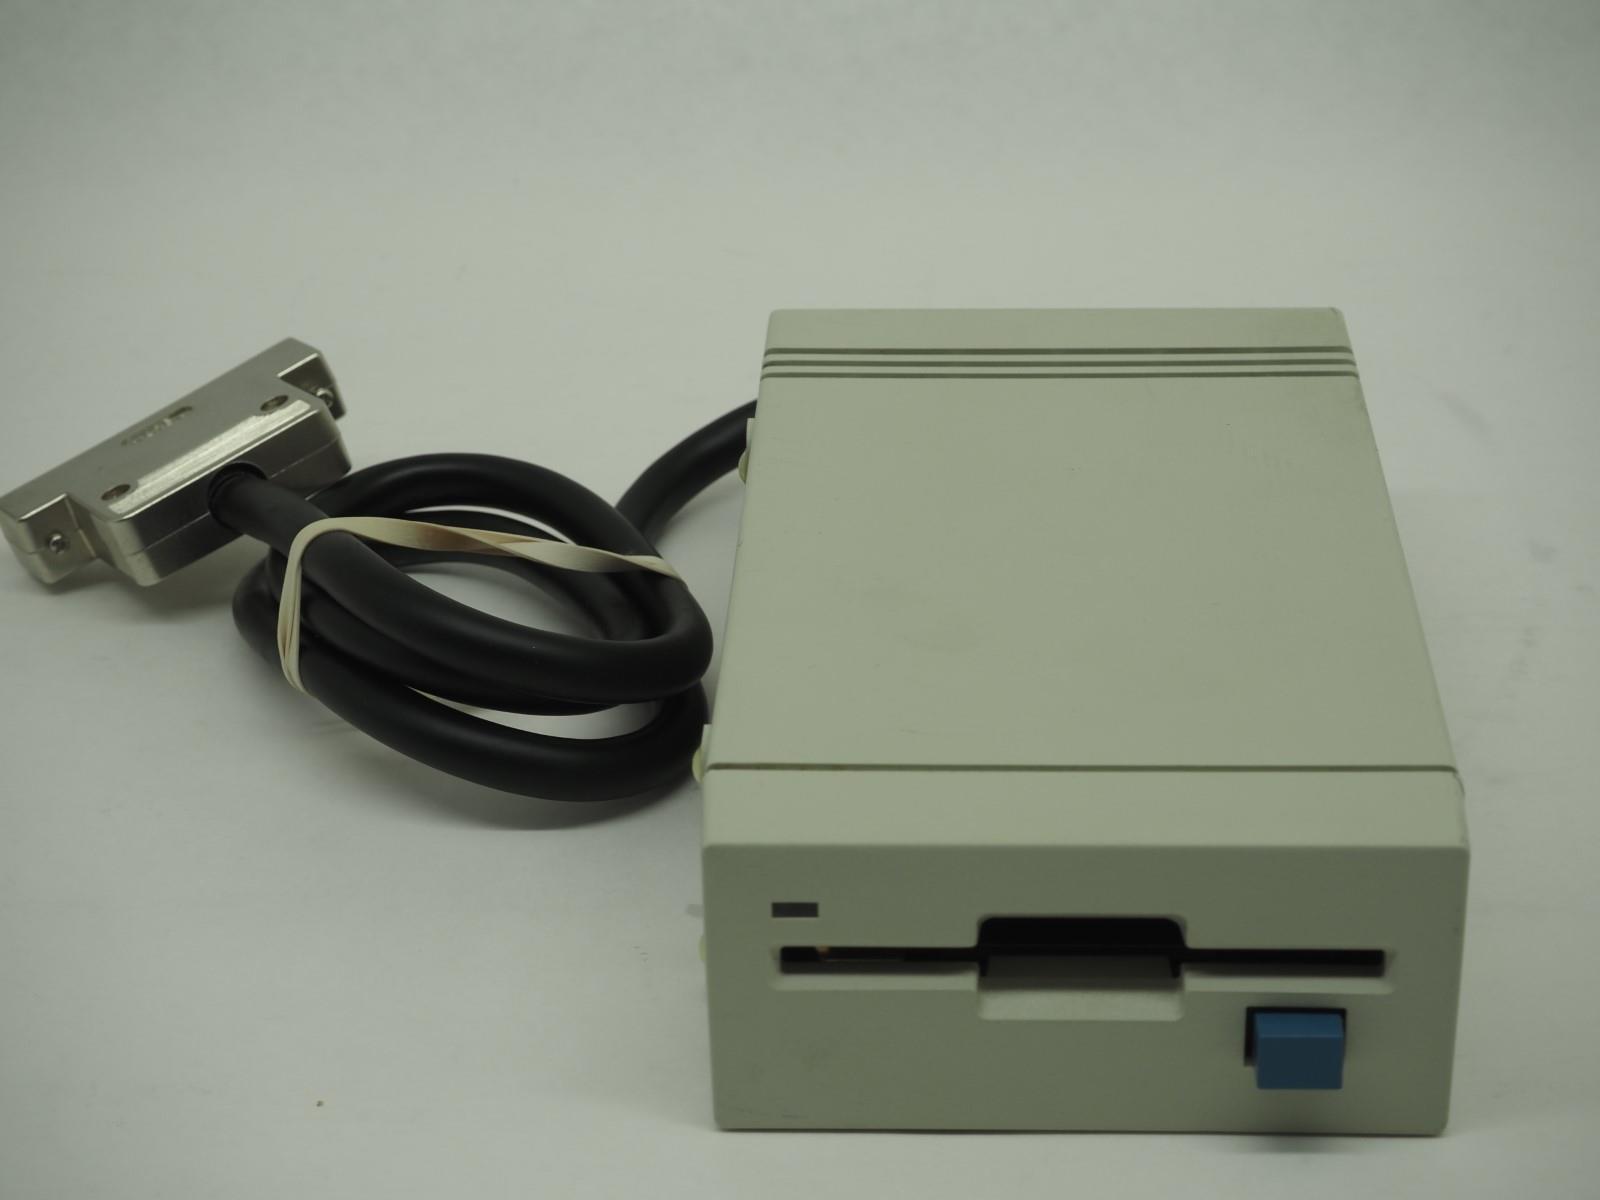 Vintage IBM TYPE 4865 3.5 FLOPPY DISK DRIVE FOR 5150 -Untested